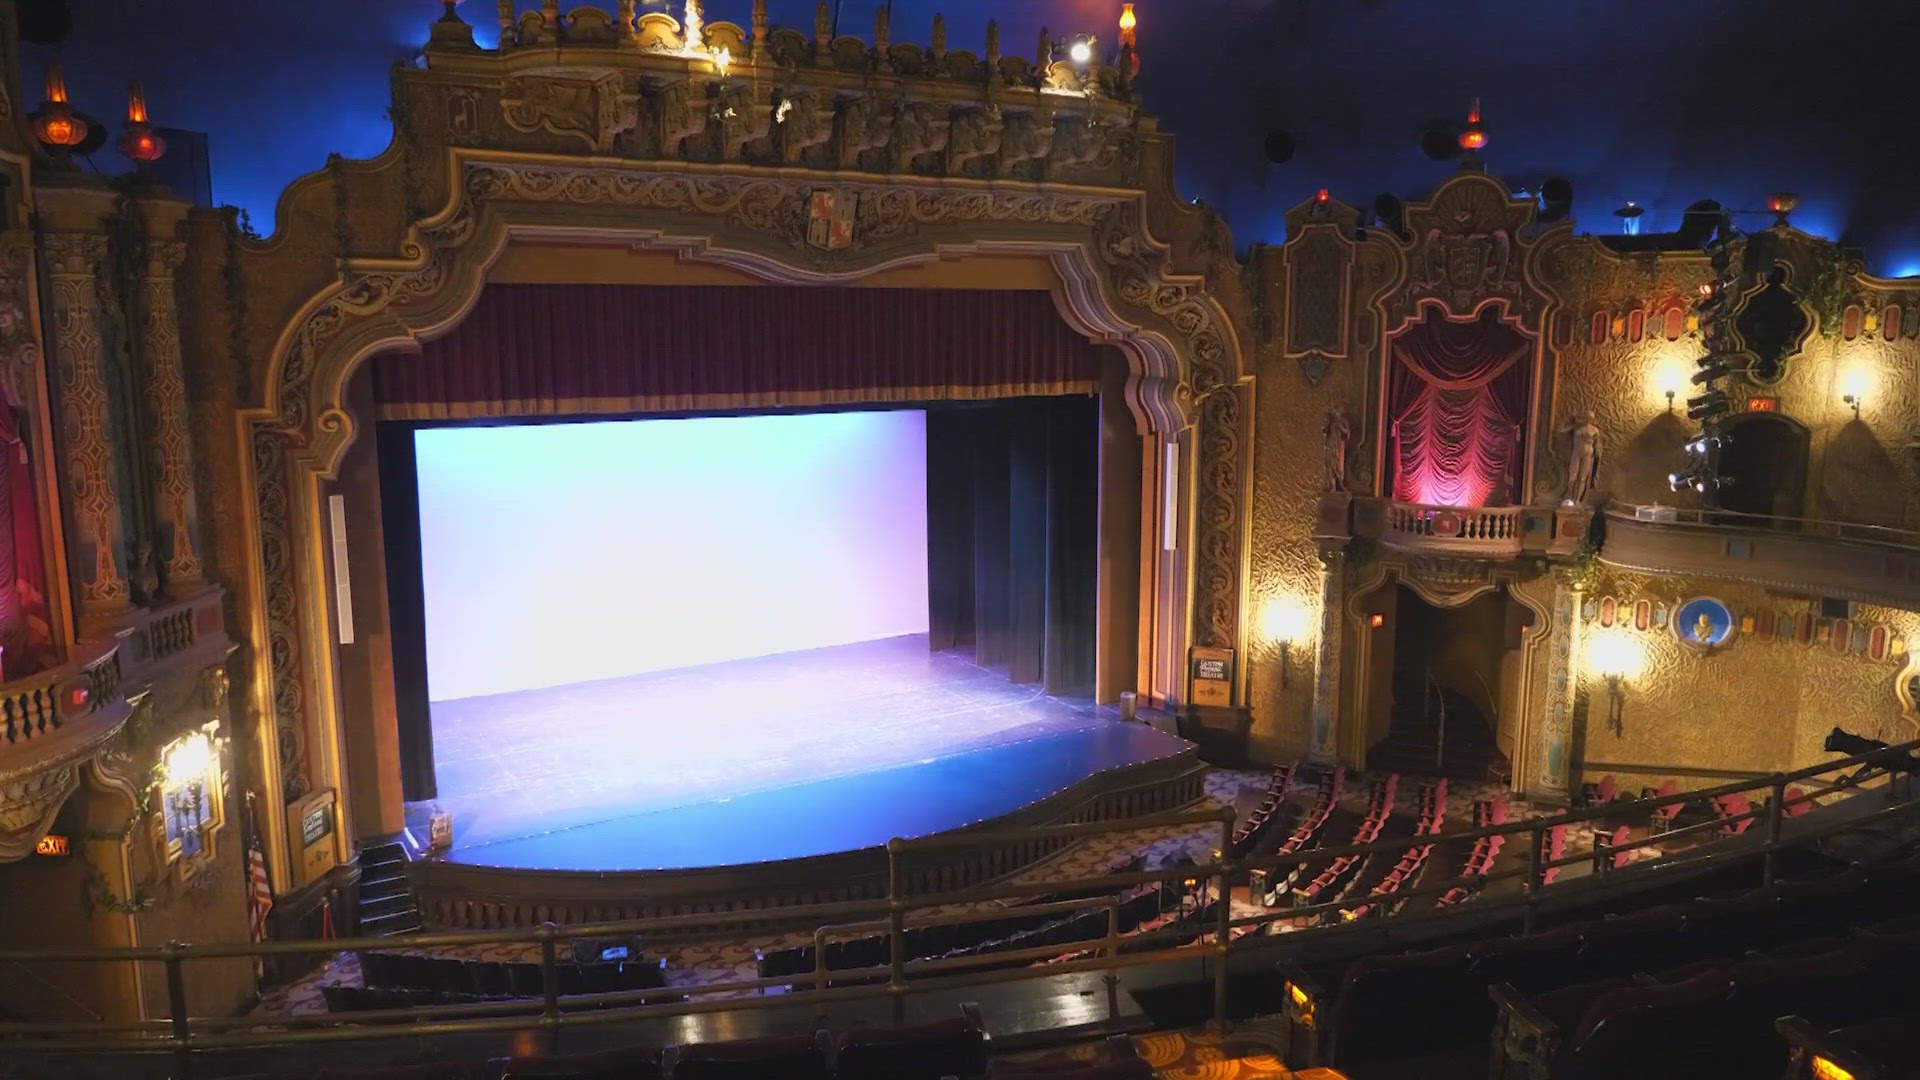 The Palace Theatre will soon begin a $16 million renovation to improve the audience experience and secure the theatre’s future.